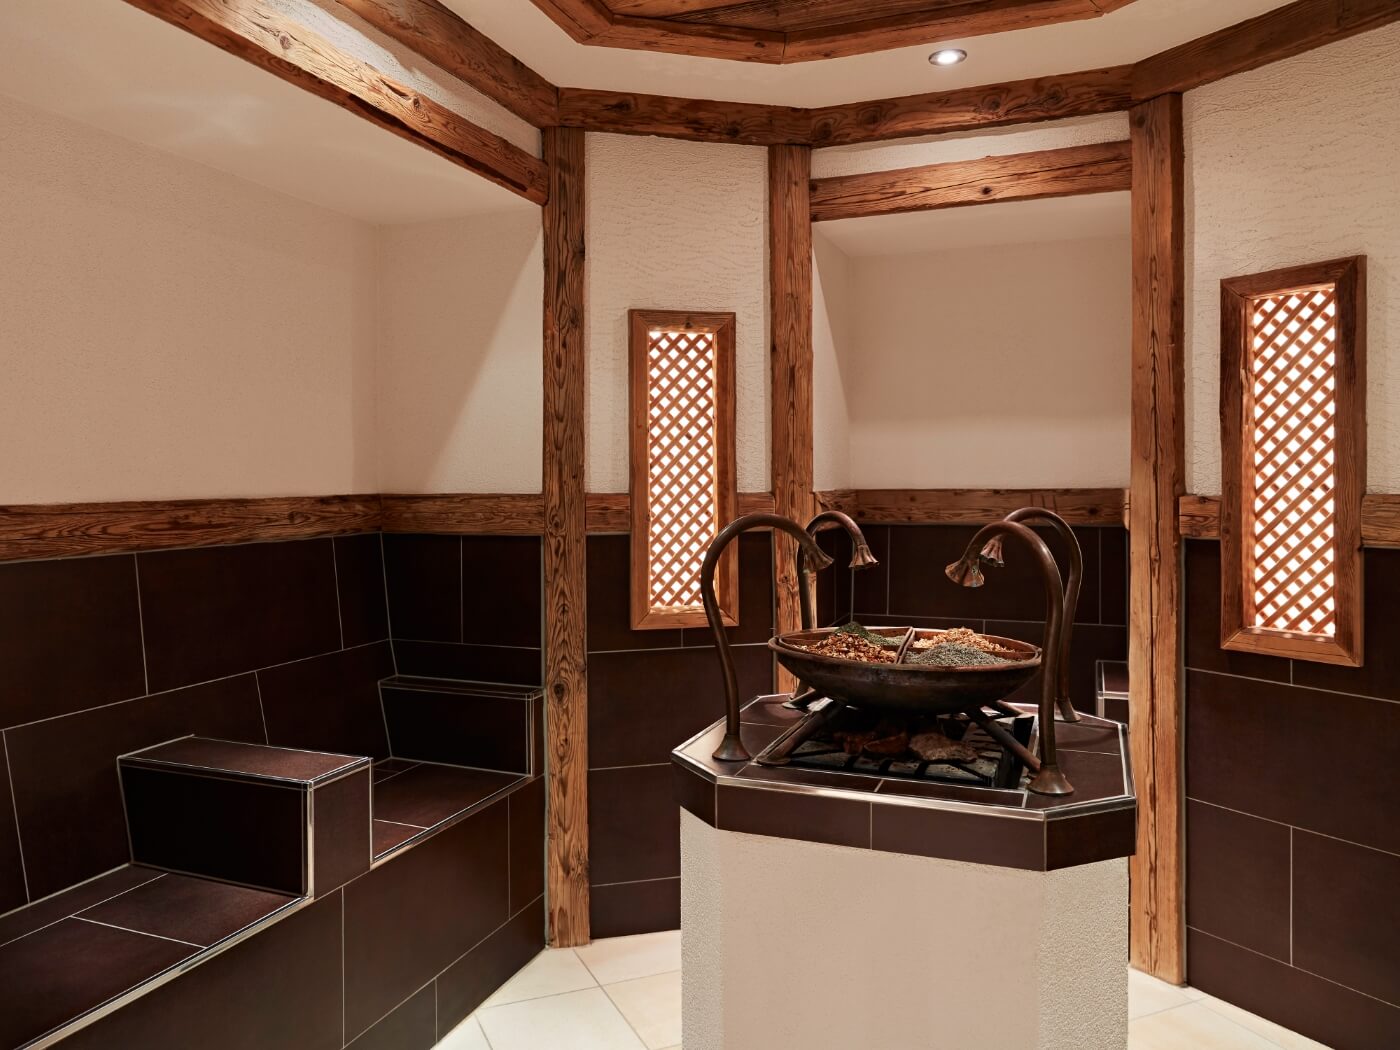 A steam sauna in earth tones for a wellness weekend in Kitzbühel